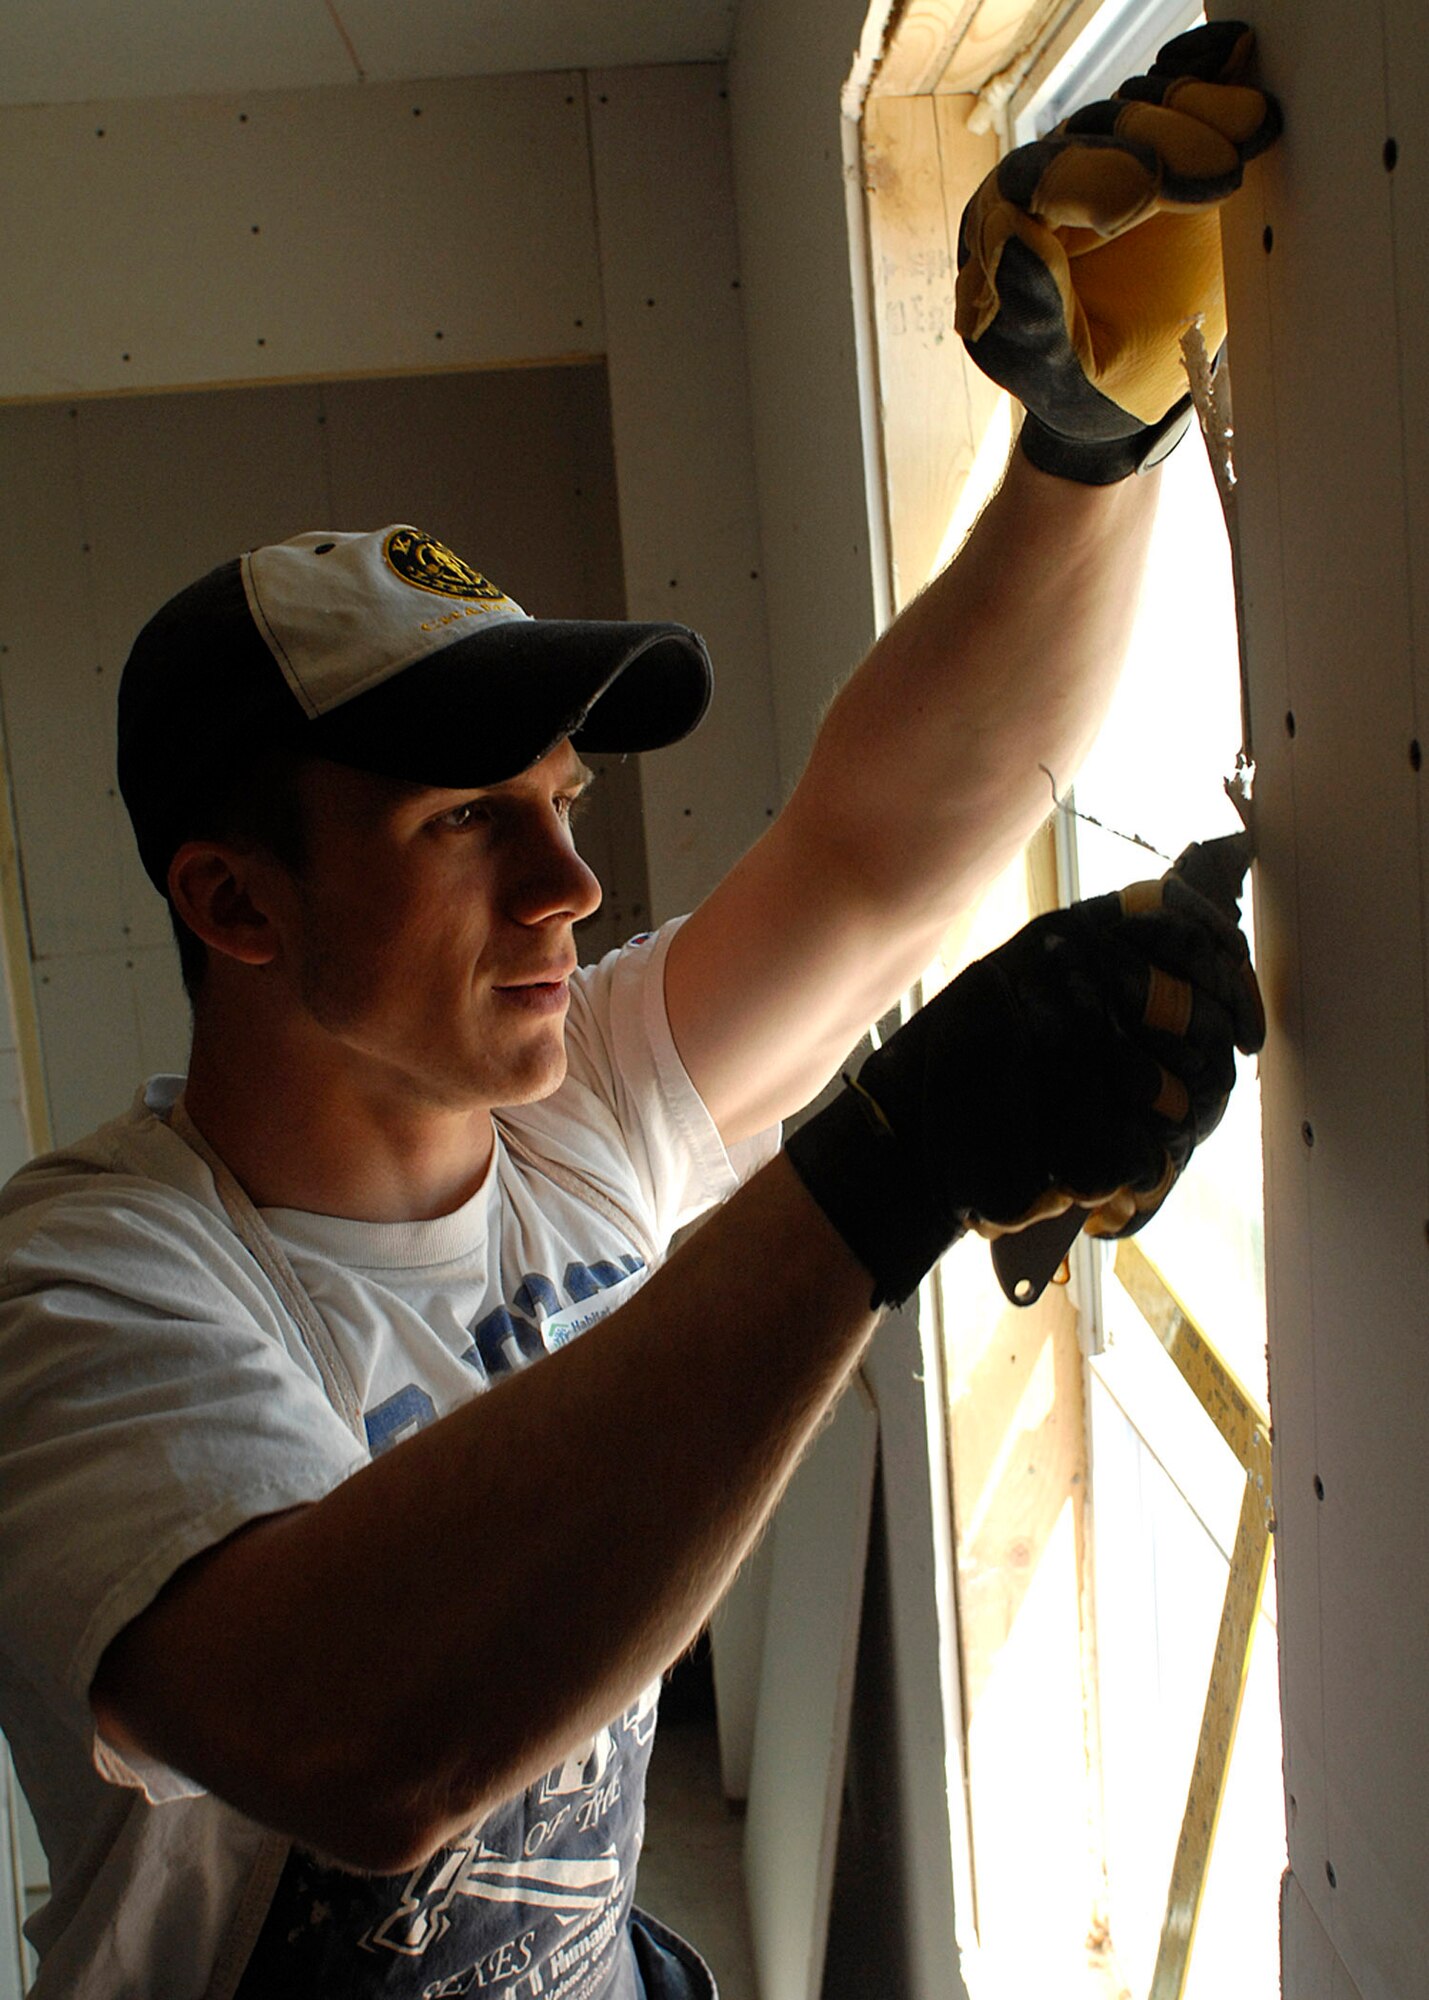 U.S. Air Force Academy Cadet Jordan Ostwald cuts away sheetrock at a Habitat for Humanity home in Tome, N.M. Cadet Ostwald is joining a group of approximately 10 other cadets who are using their spring break to volunteer rather than traveling and relaxing. (U.S. Air Force photo/Todd Berenger.)